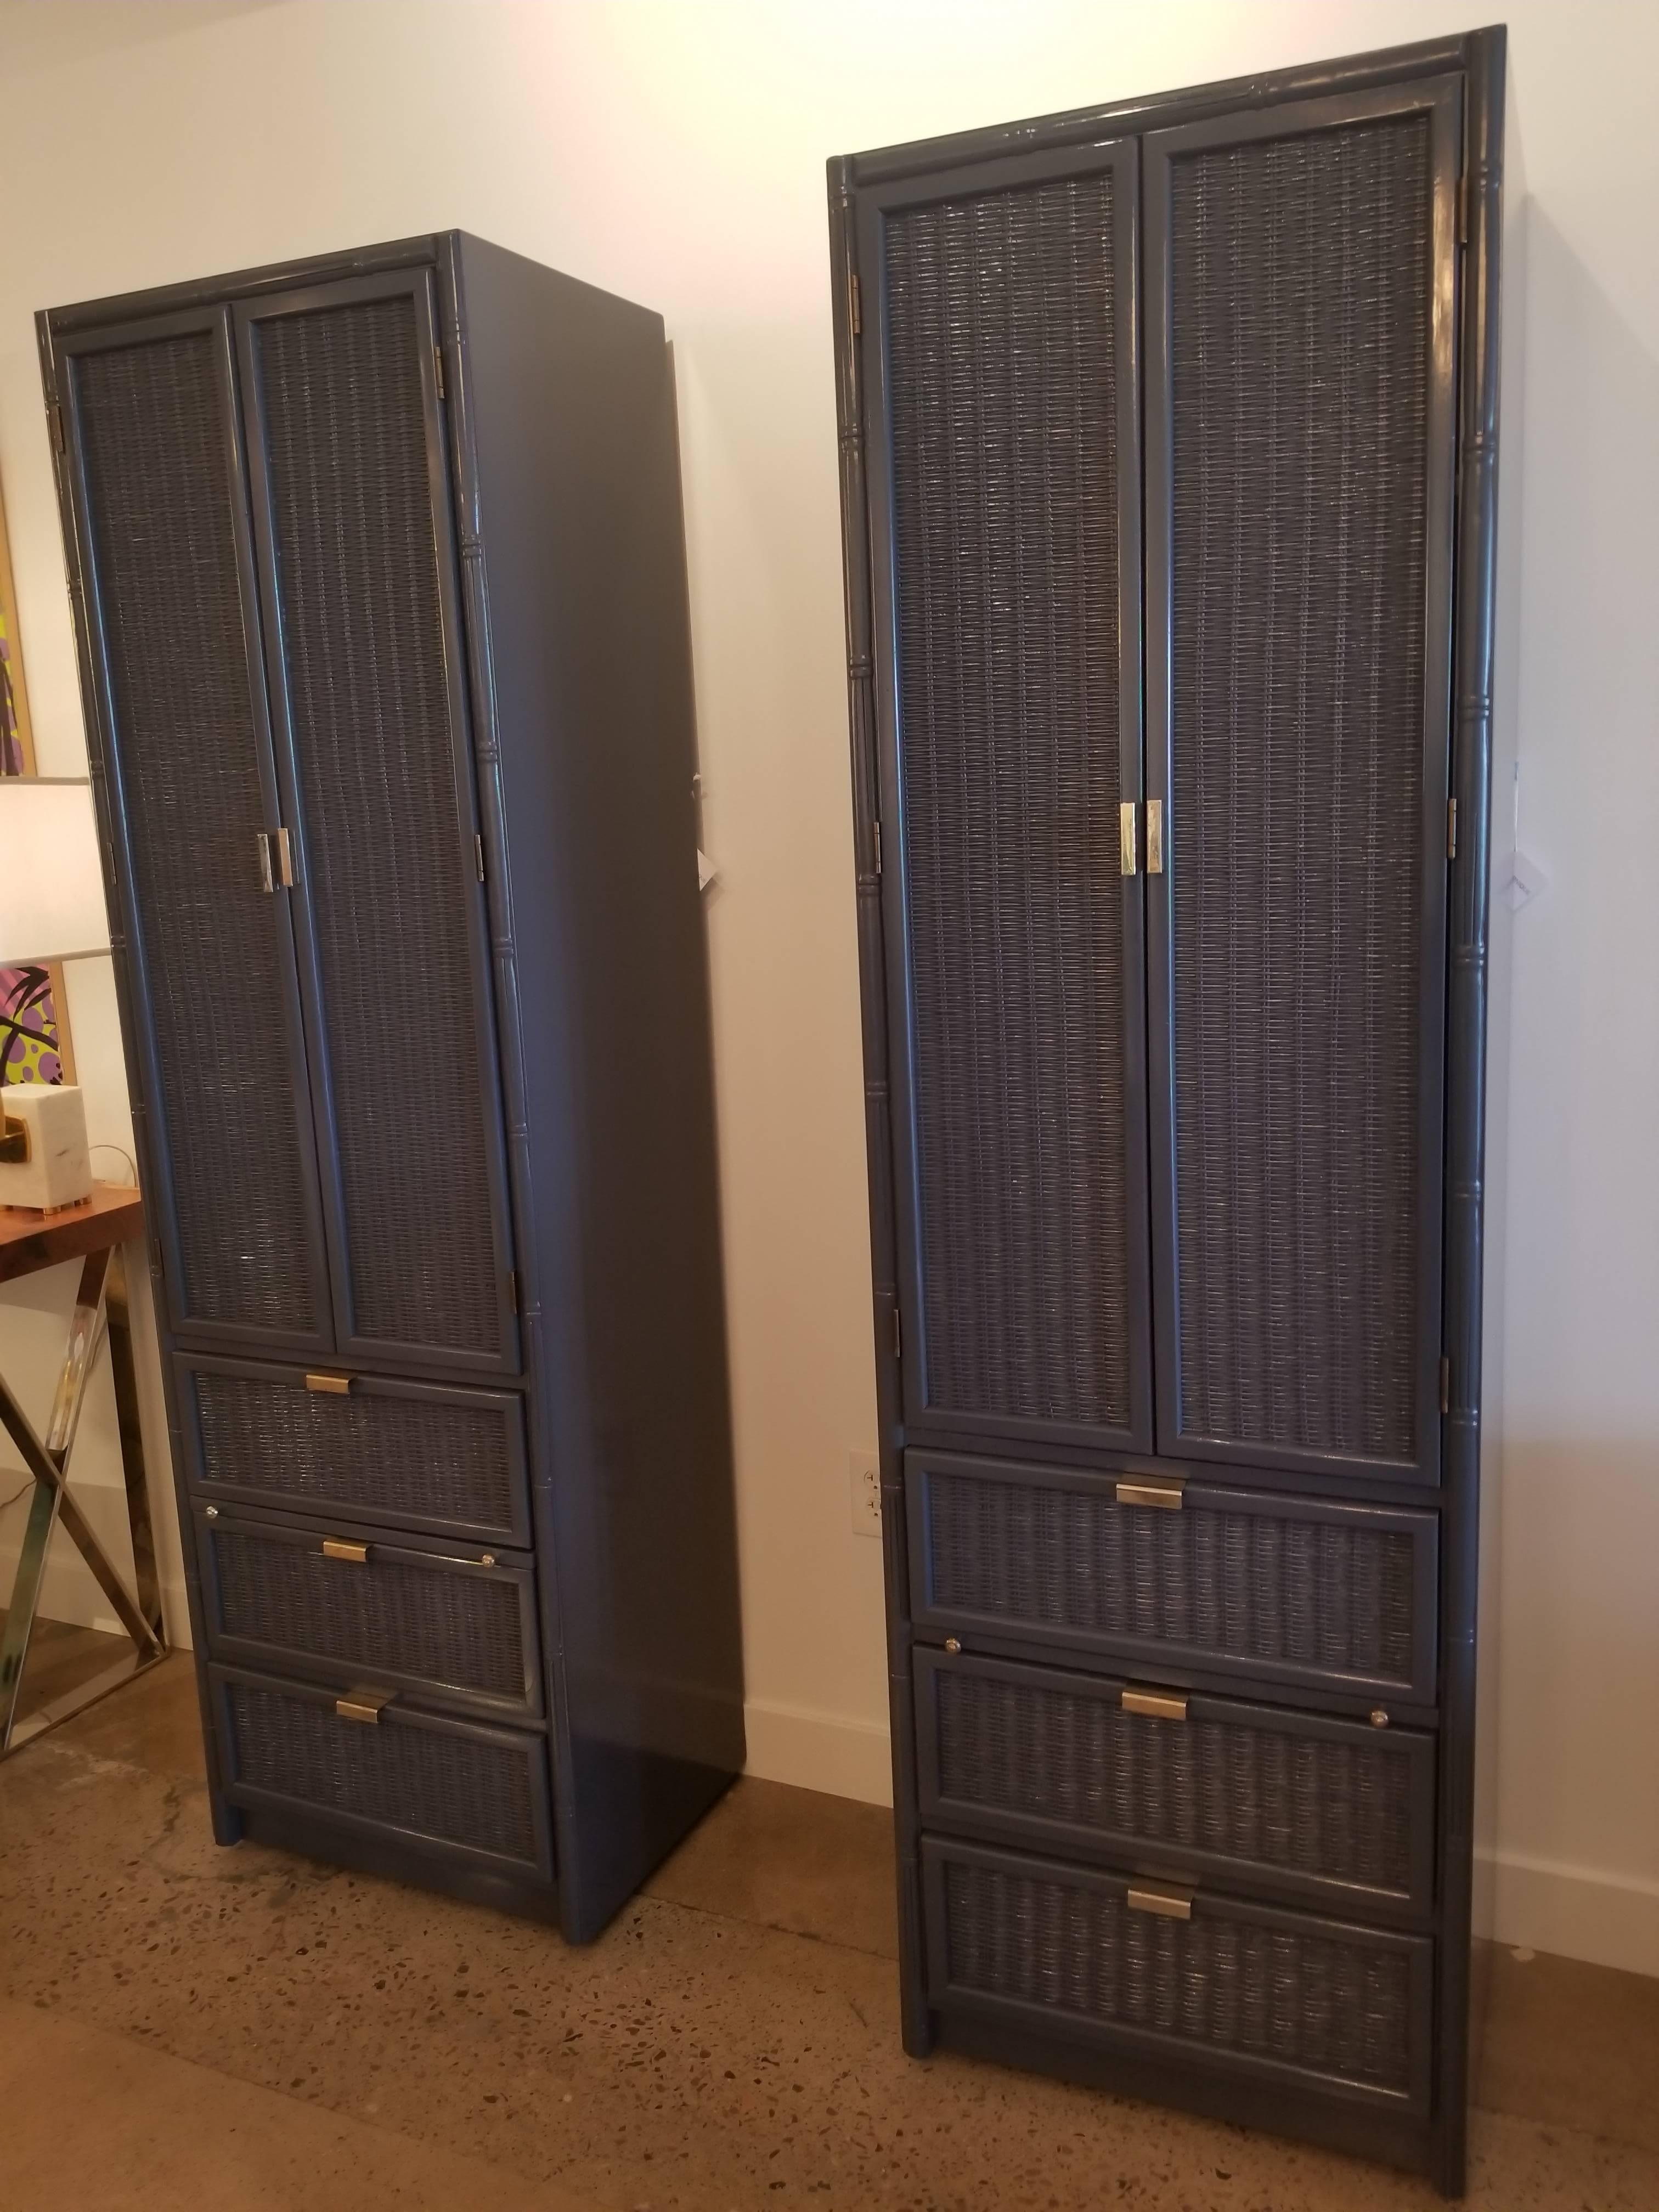 This pair of vintage Bernhardt bamboo cabinets have been fully restored and lacquered in Benjamin Moore 